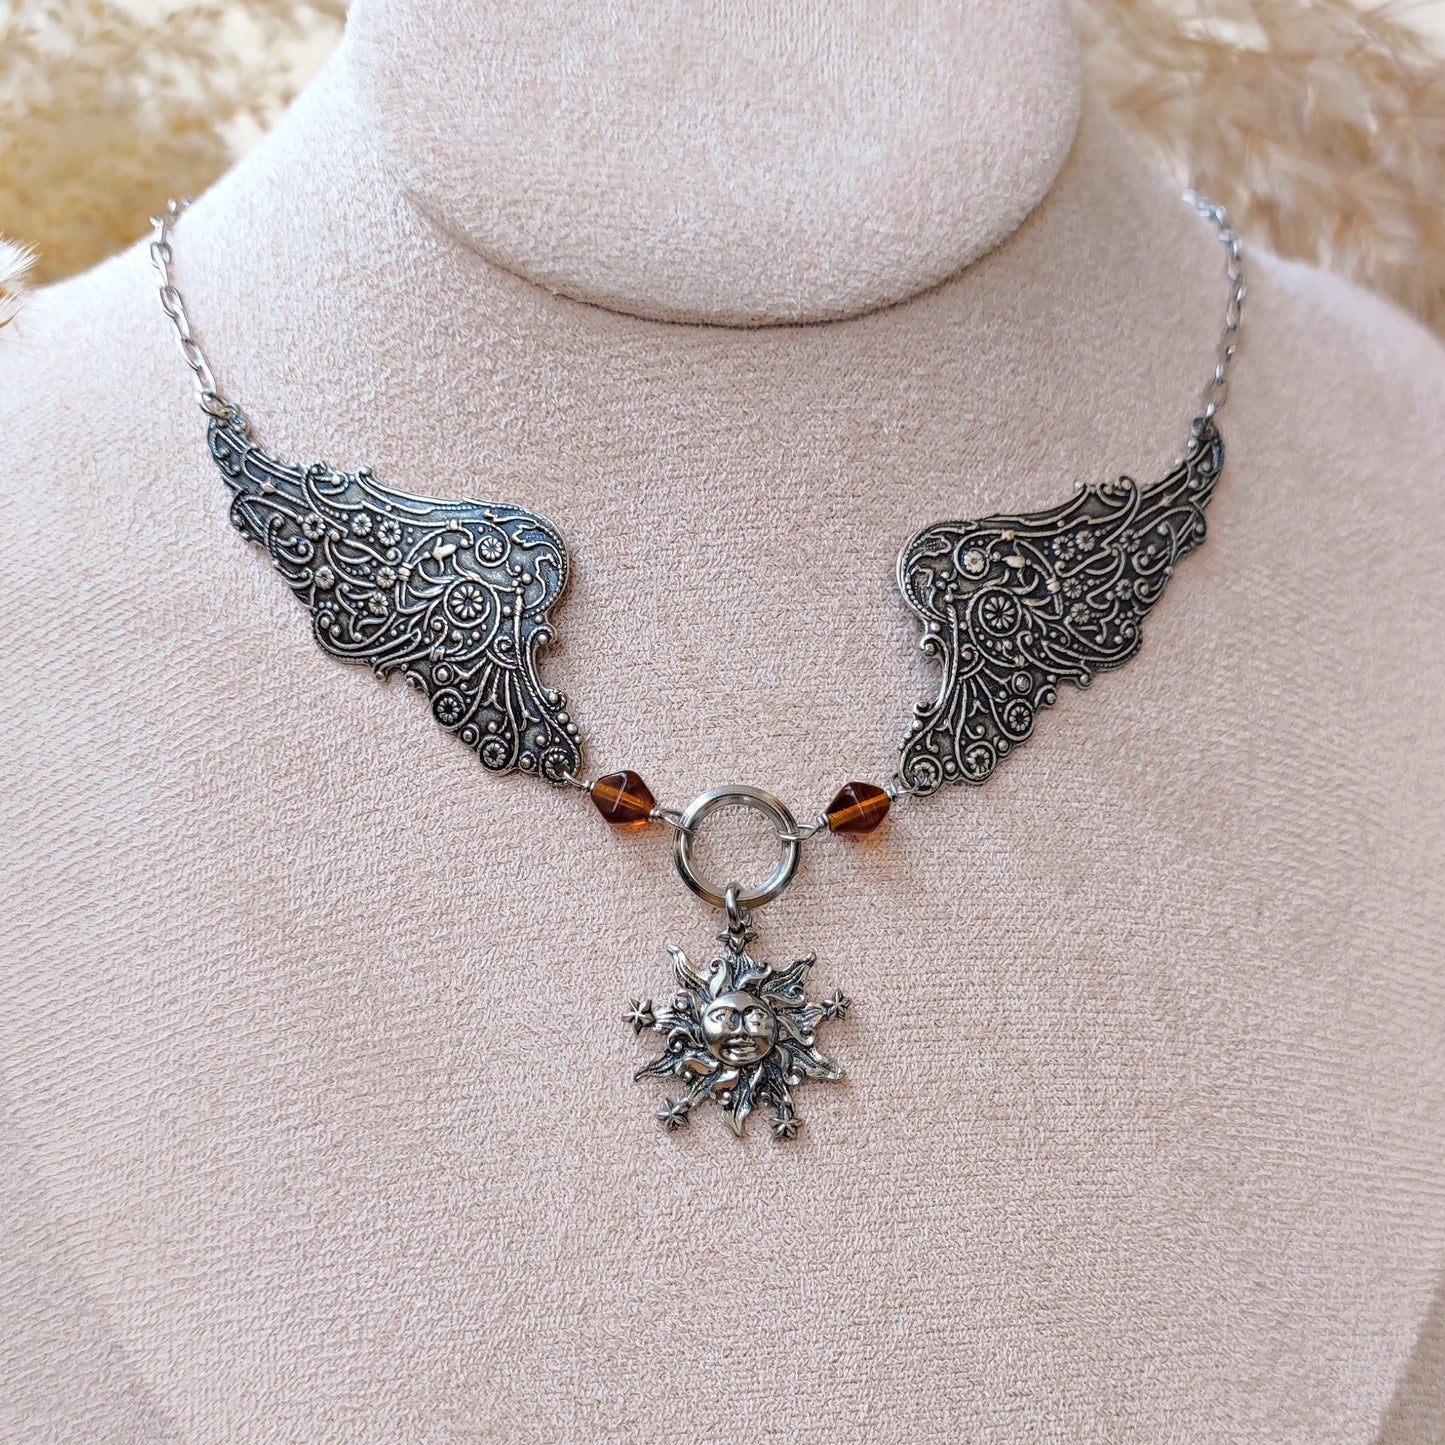 "Flight of Icarus" Choker Necklace